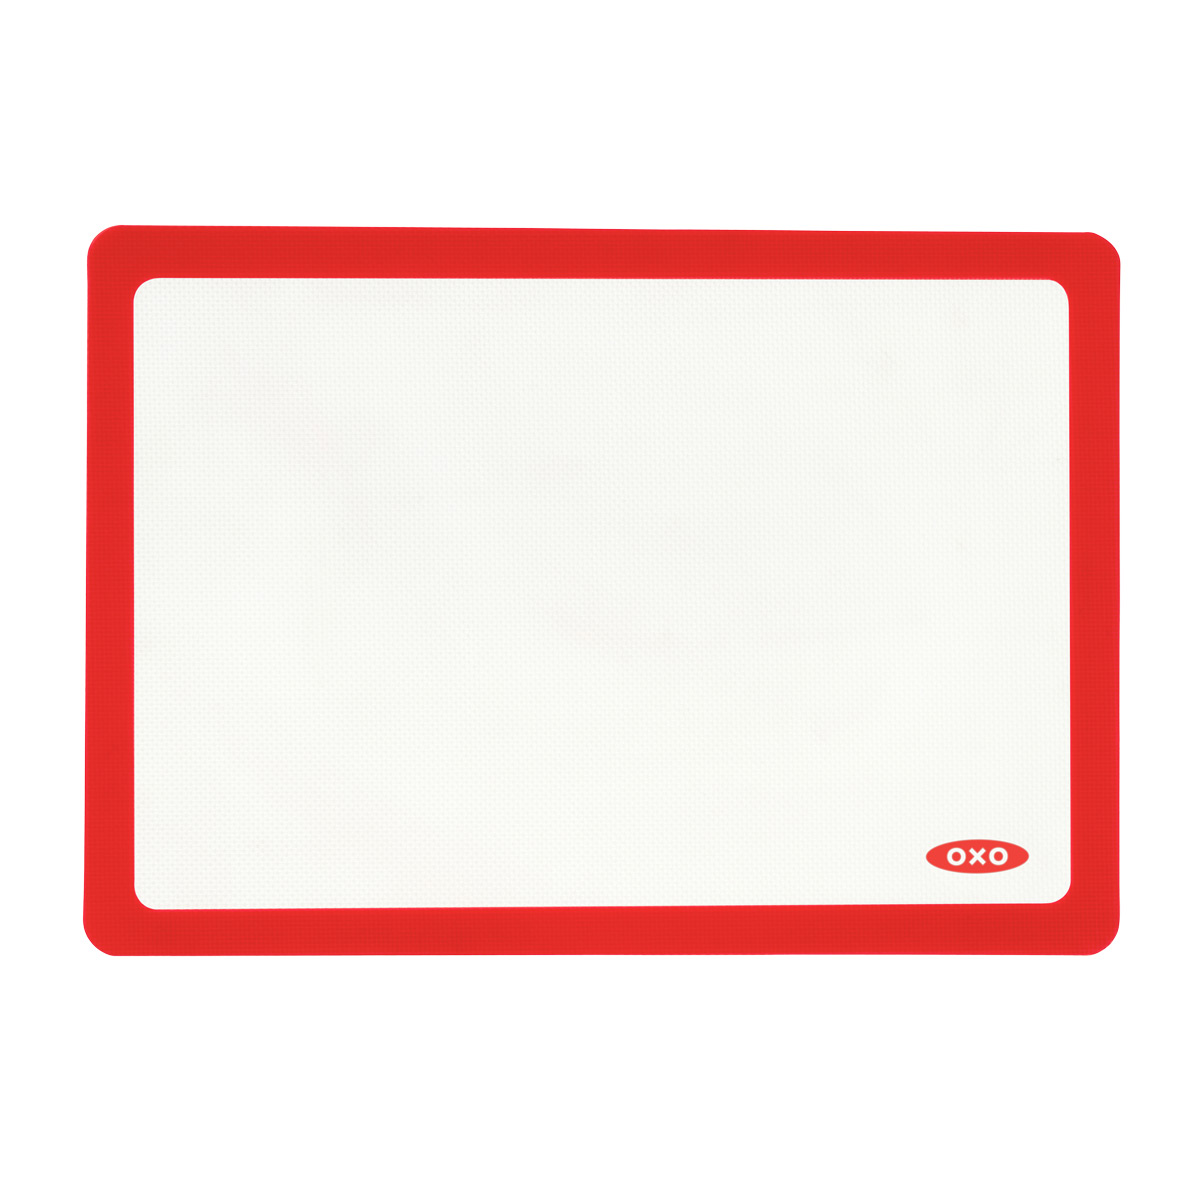 https://www.containerstore.com/catalogimages/350668/10076043-OXO-Silicone-Baking-Mat-VEN.jpg